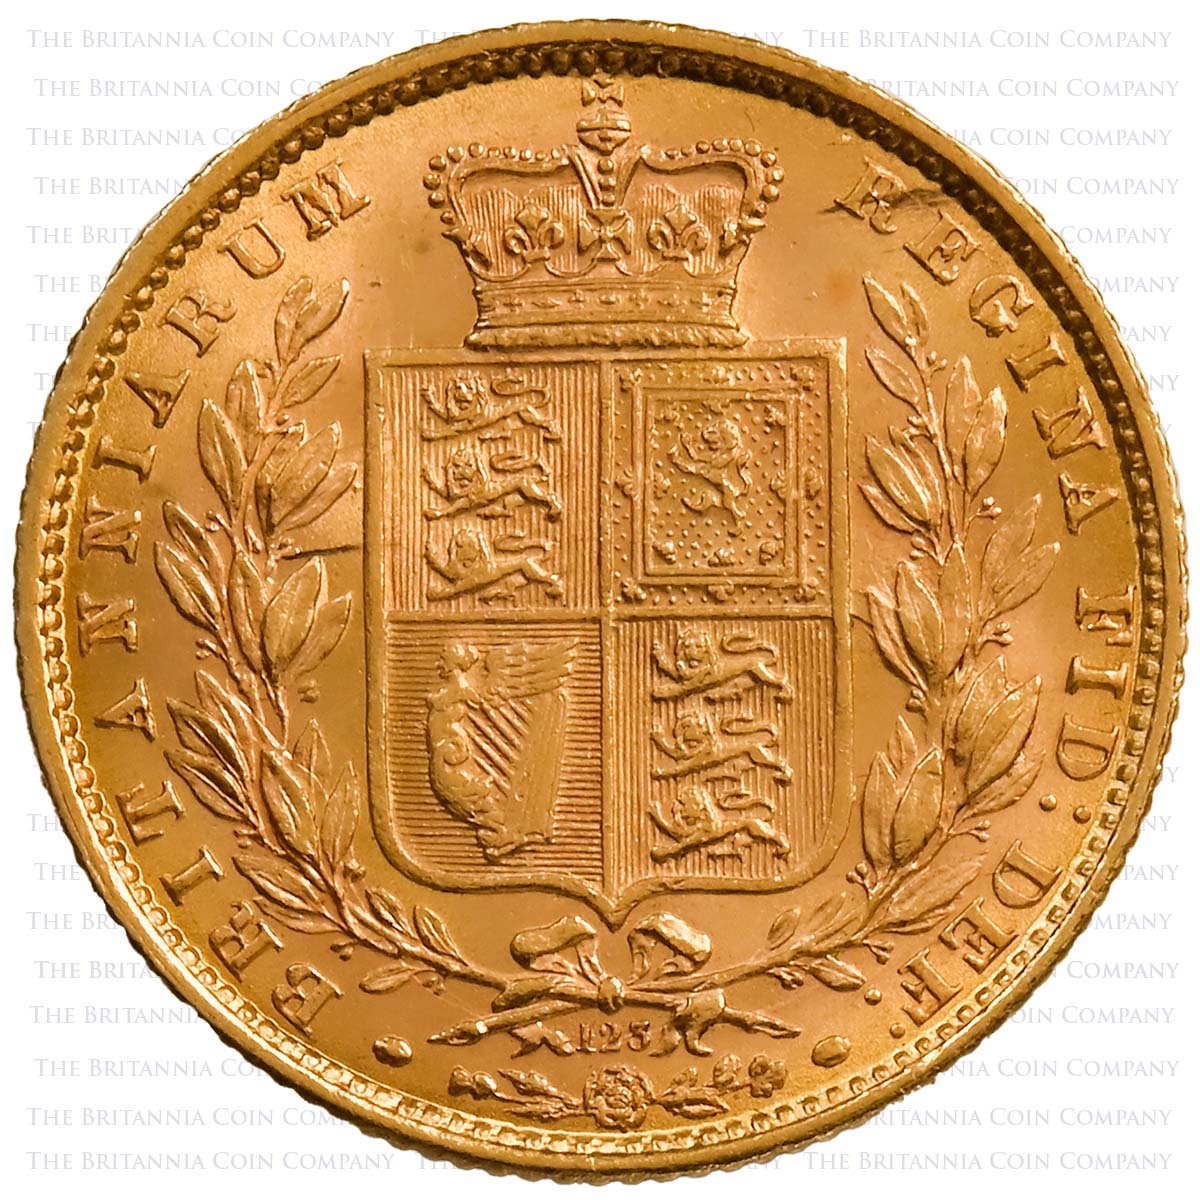 1870 Queen Victoria Gold Full Sovereign Double Struck Raised Initials London Mint Obverse